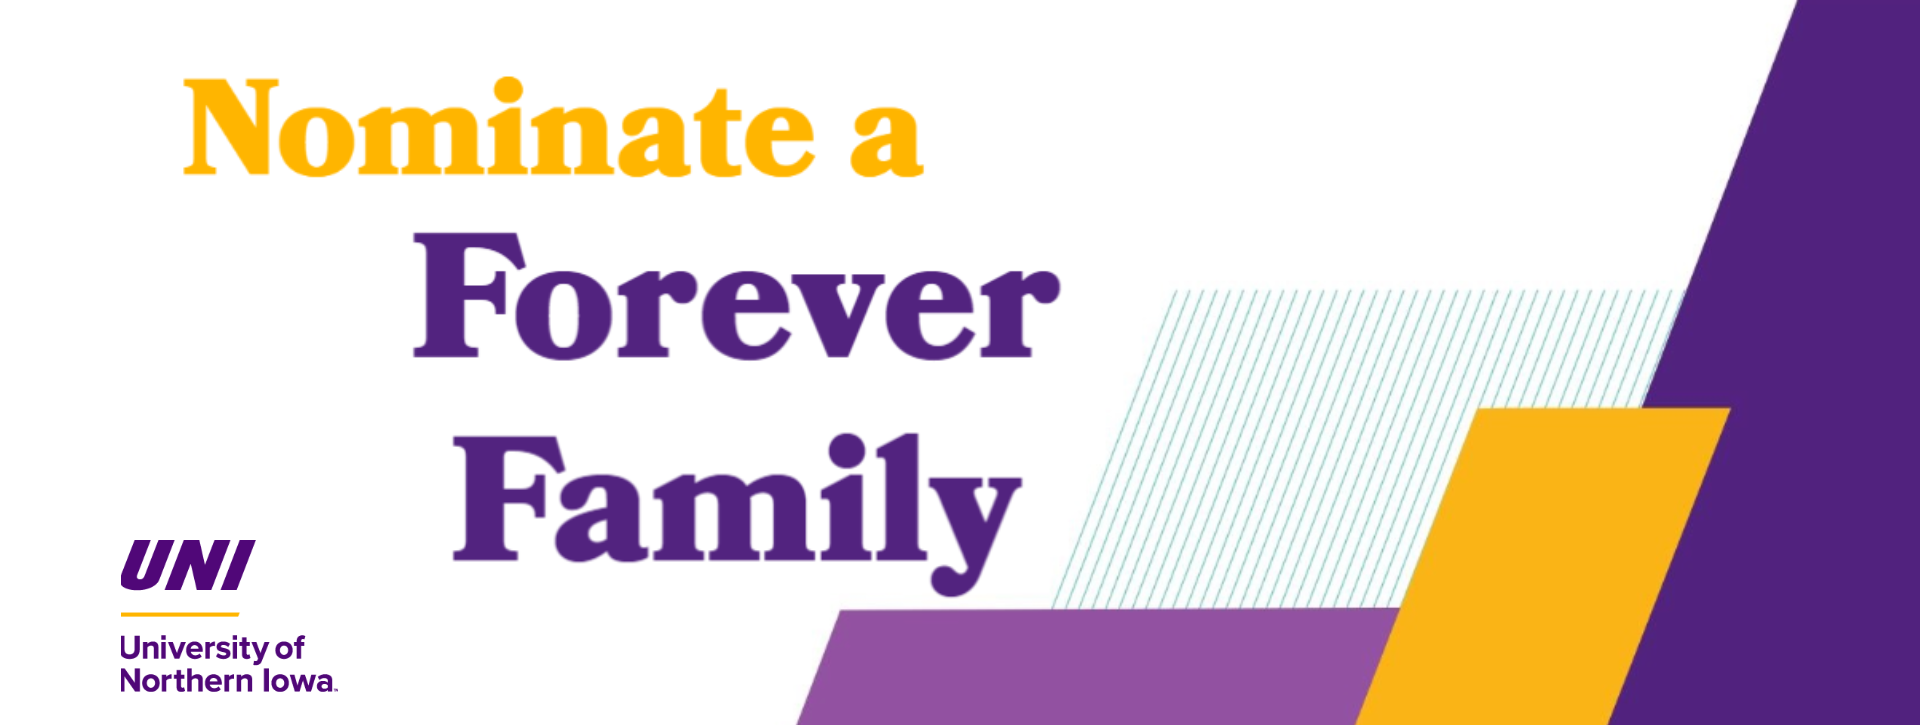 Nominate a Forever Family